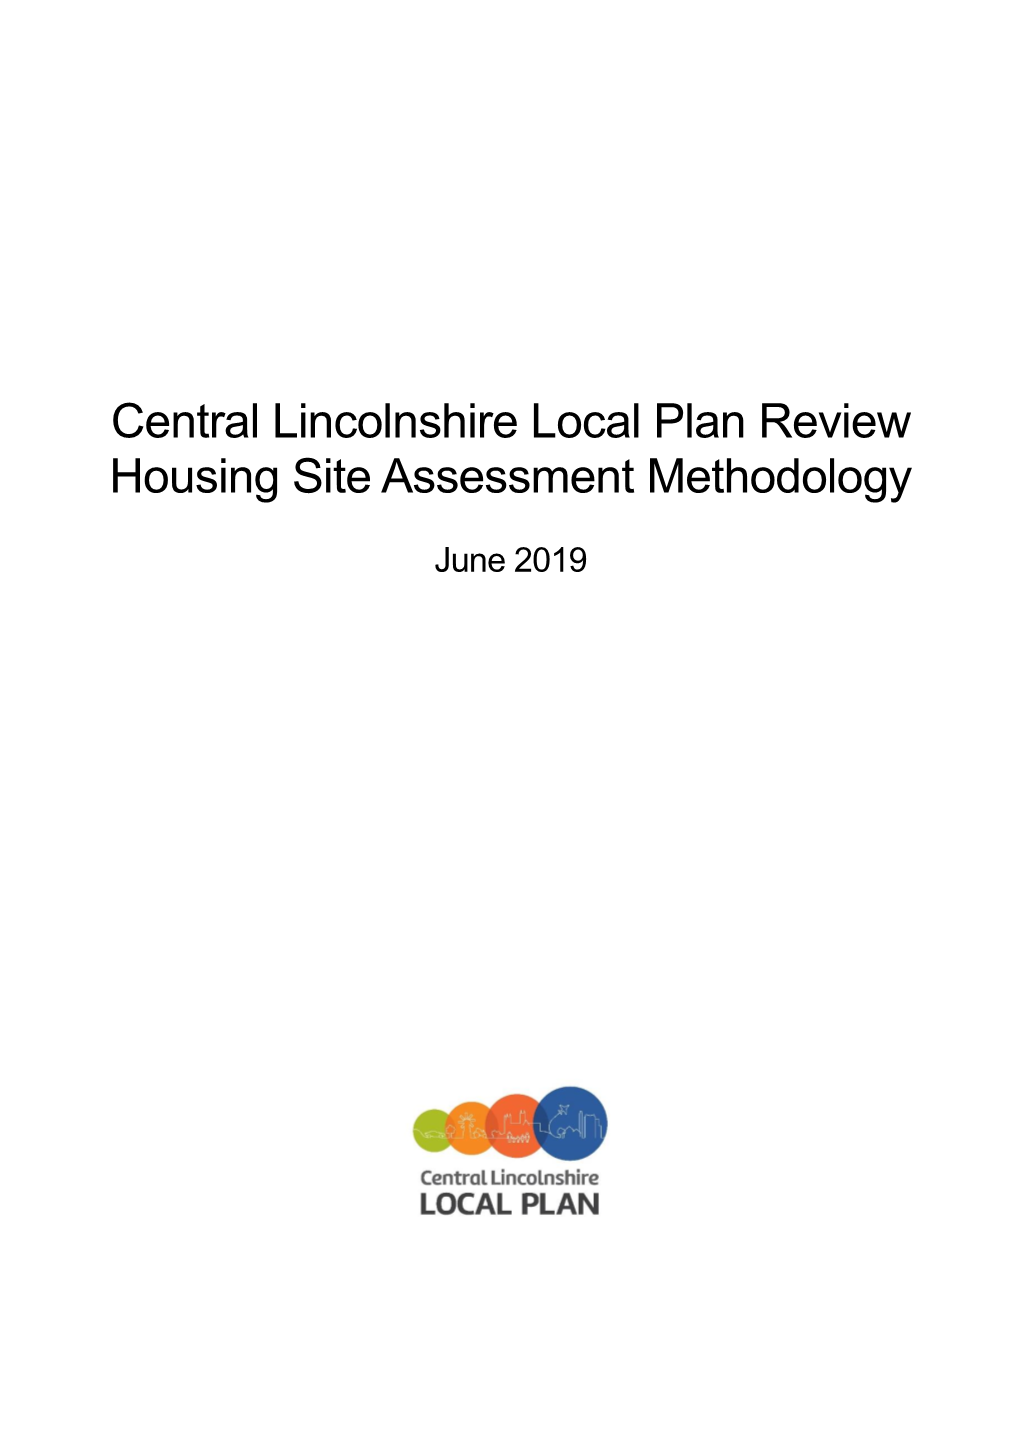 Central Lincolnshire Local Plan Review Housing Site Assessment Methodology